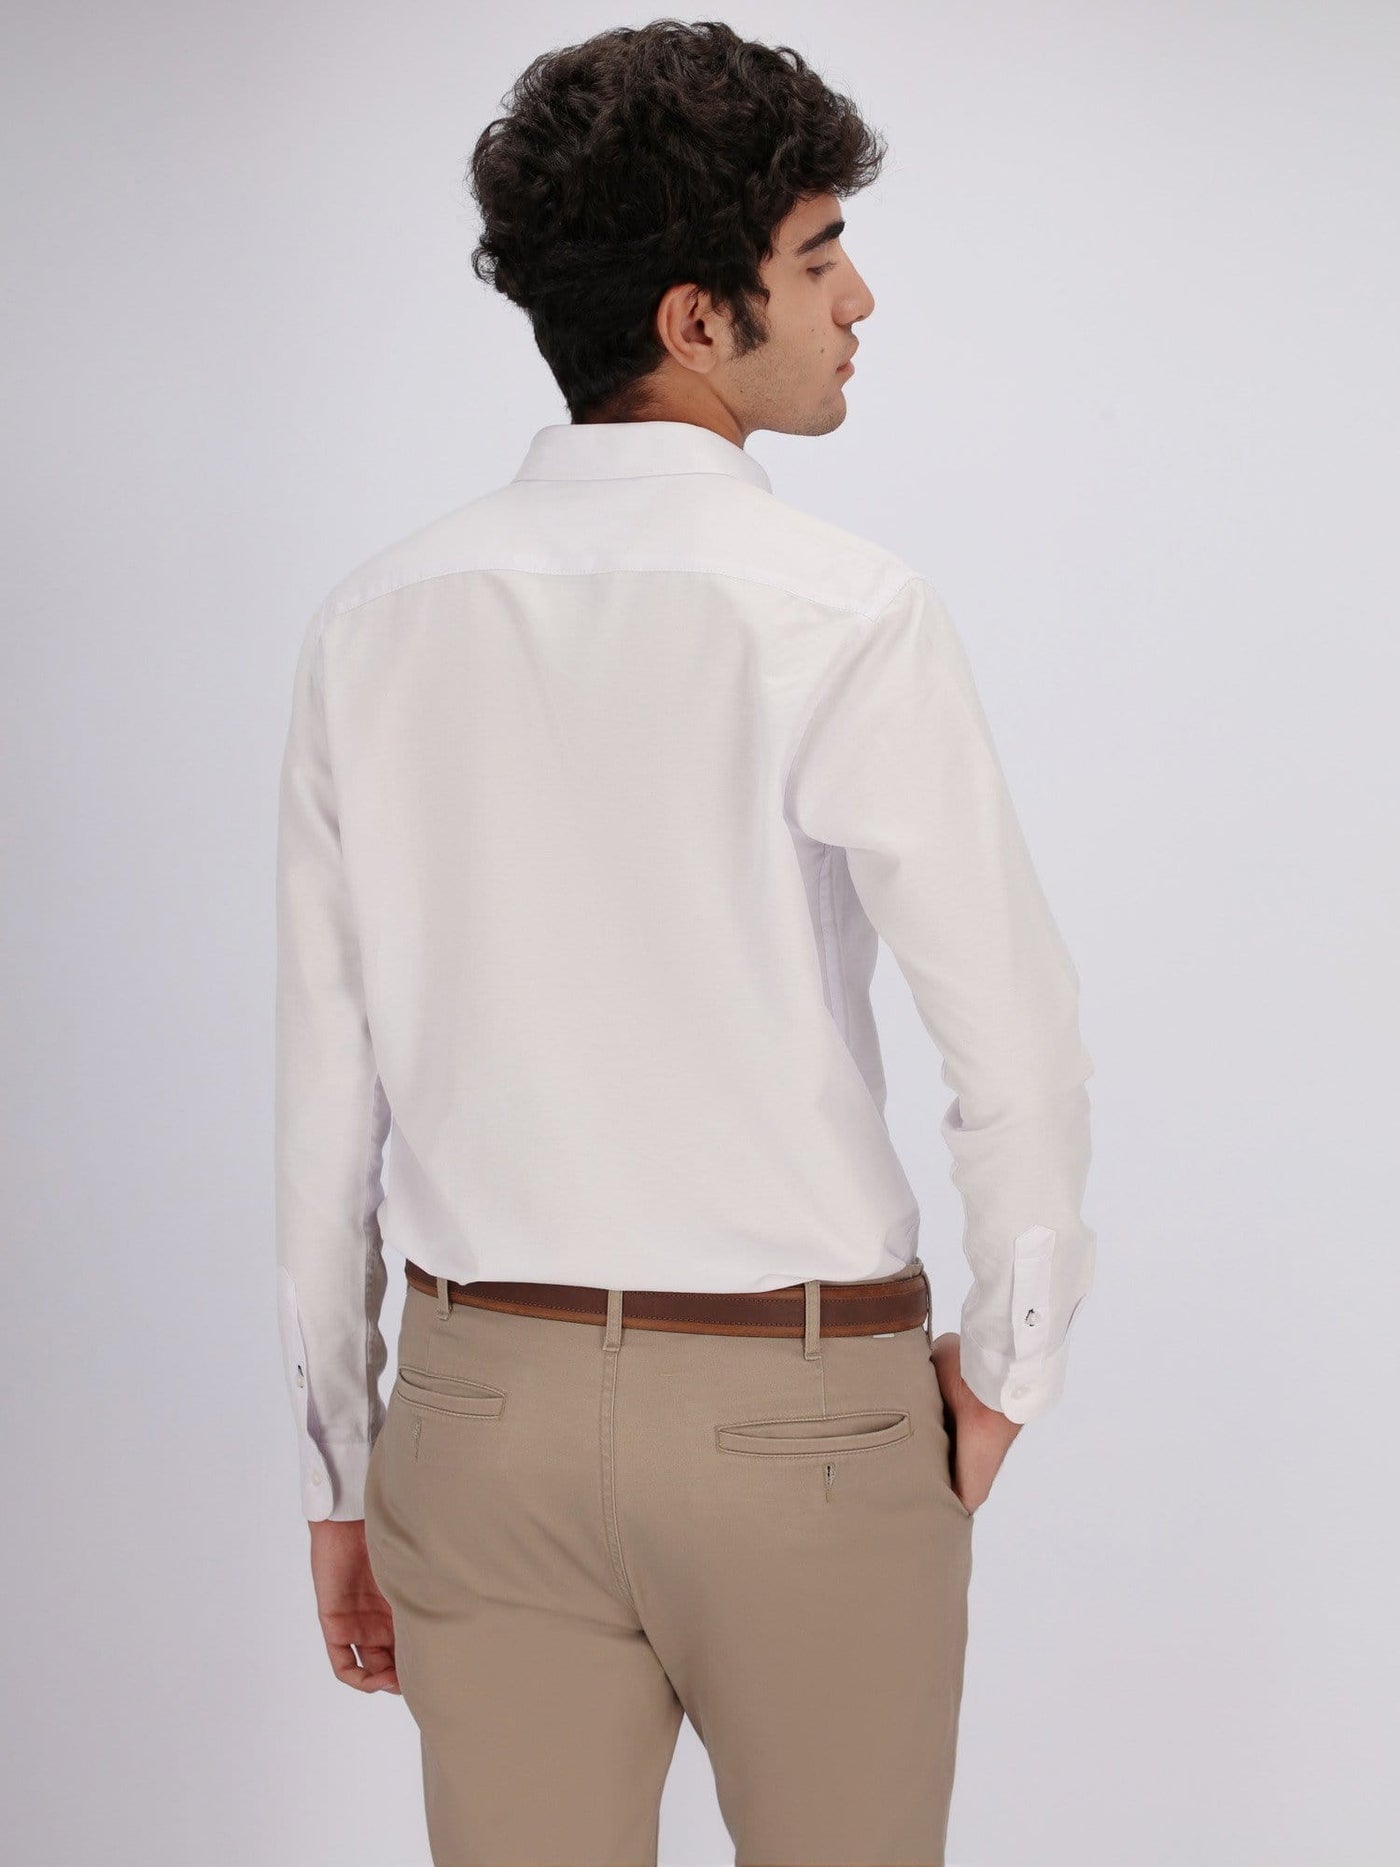 OR Shirts Casual Solid Shirt with Button-Down with Contrasting Color